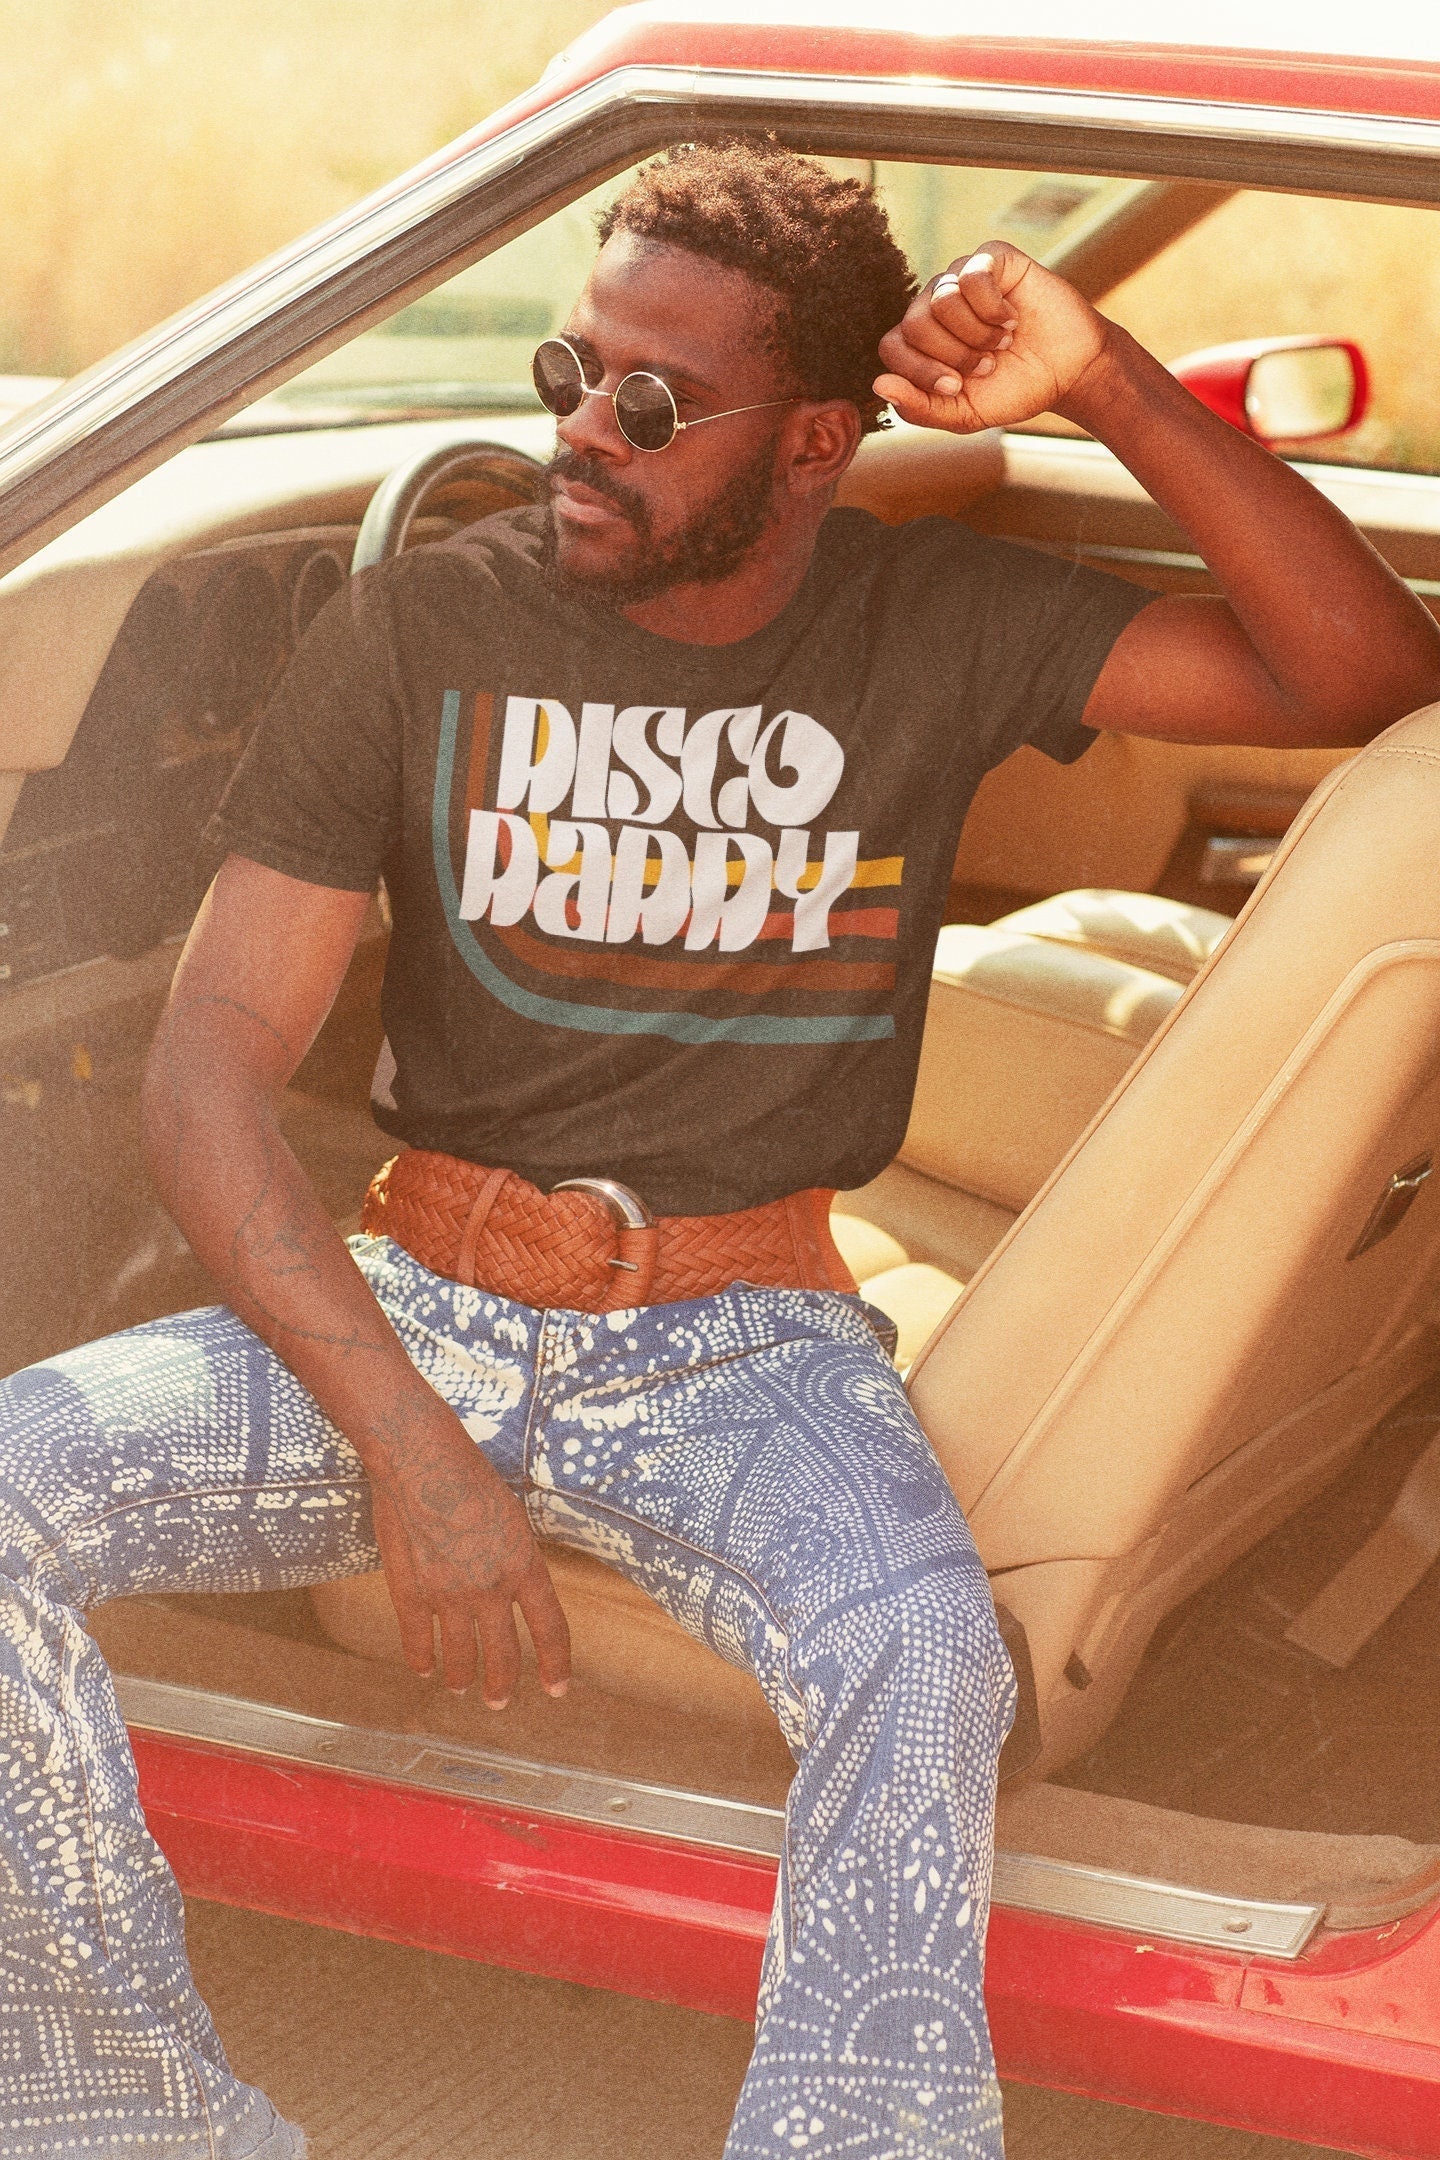 Disco Daddy Stripe 70s Clothing Catch Phrase T Shirt Trendy Graphic Tee  Vintage Aesthetic Unisex Vintage Print 70s Fashion 